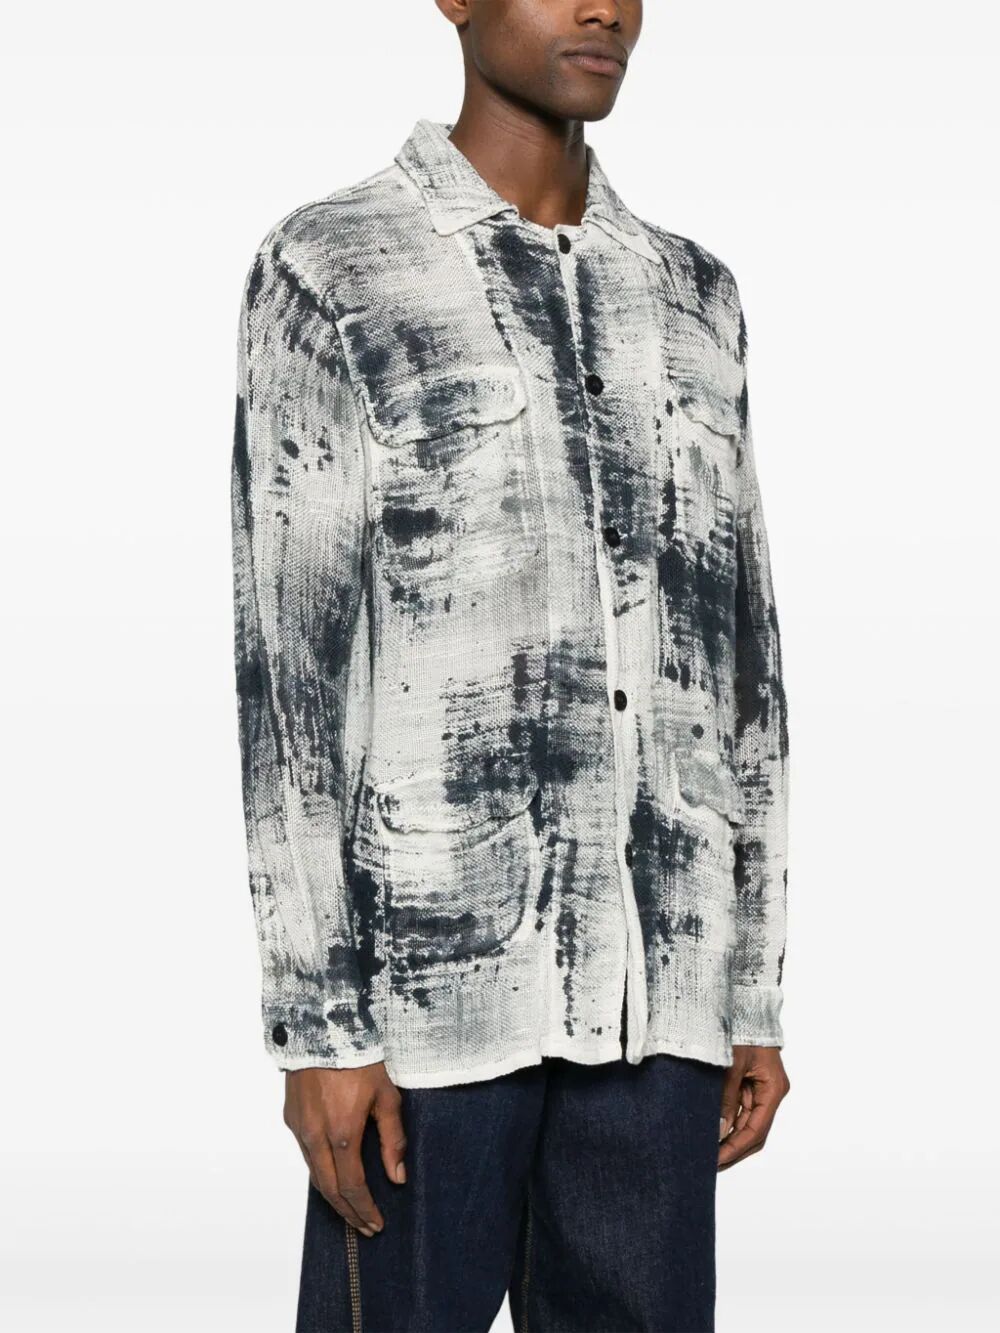 Brushed Effect Net Fabric Shirt With Pockets